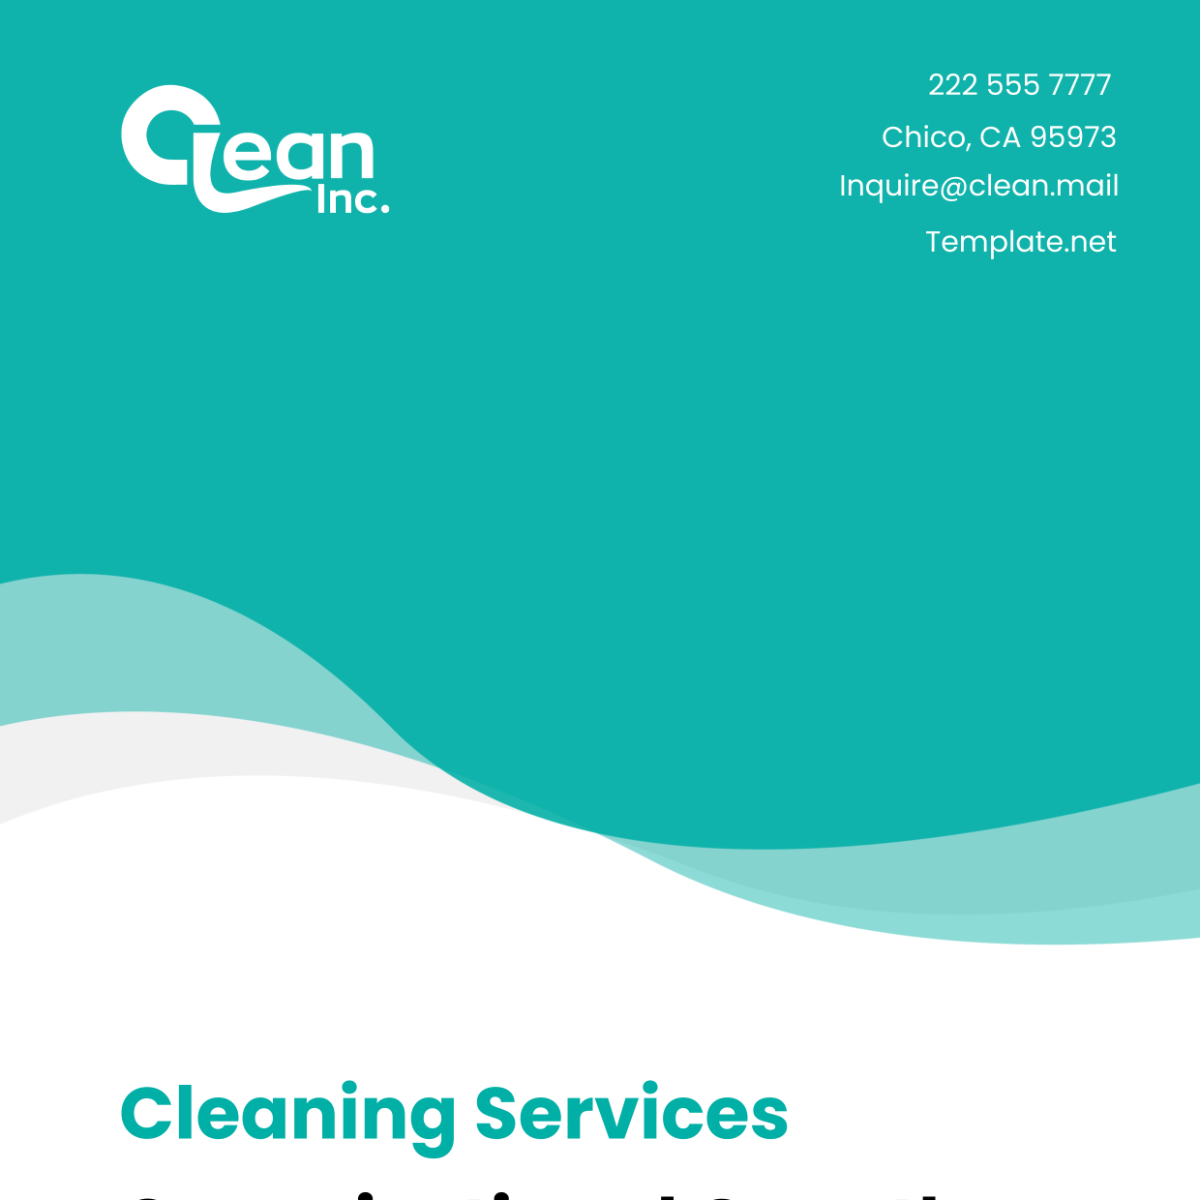 Free Cleaning Services Organizational Growth Strategy Plan Template